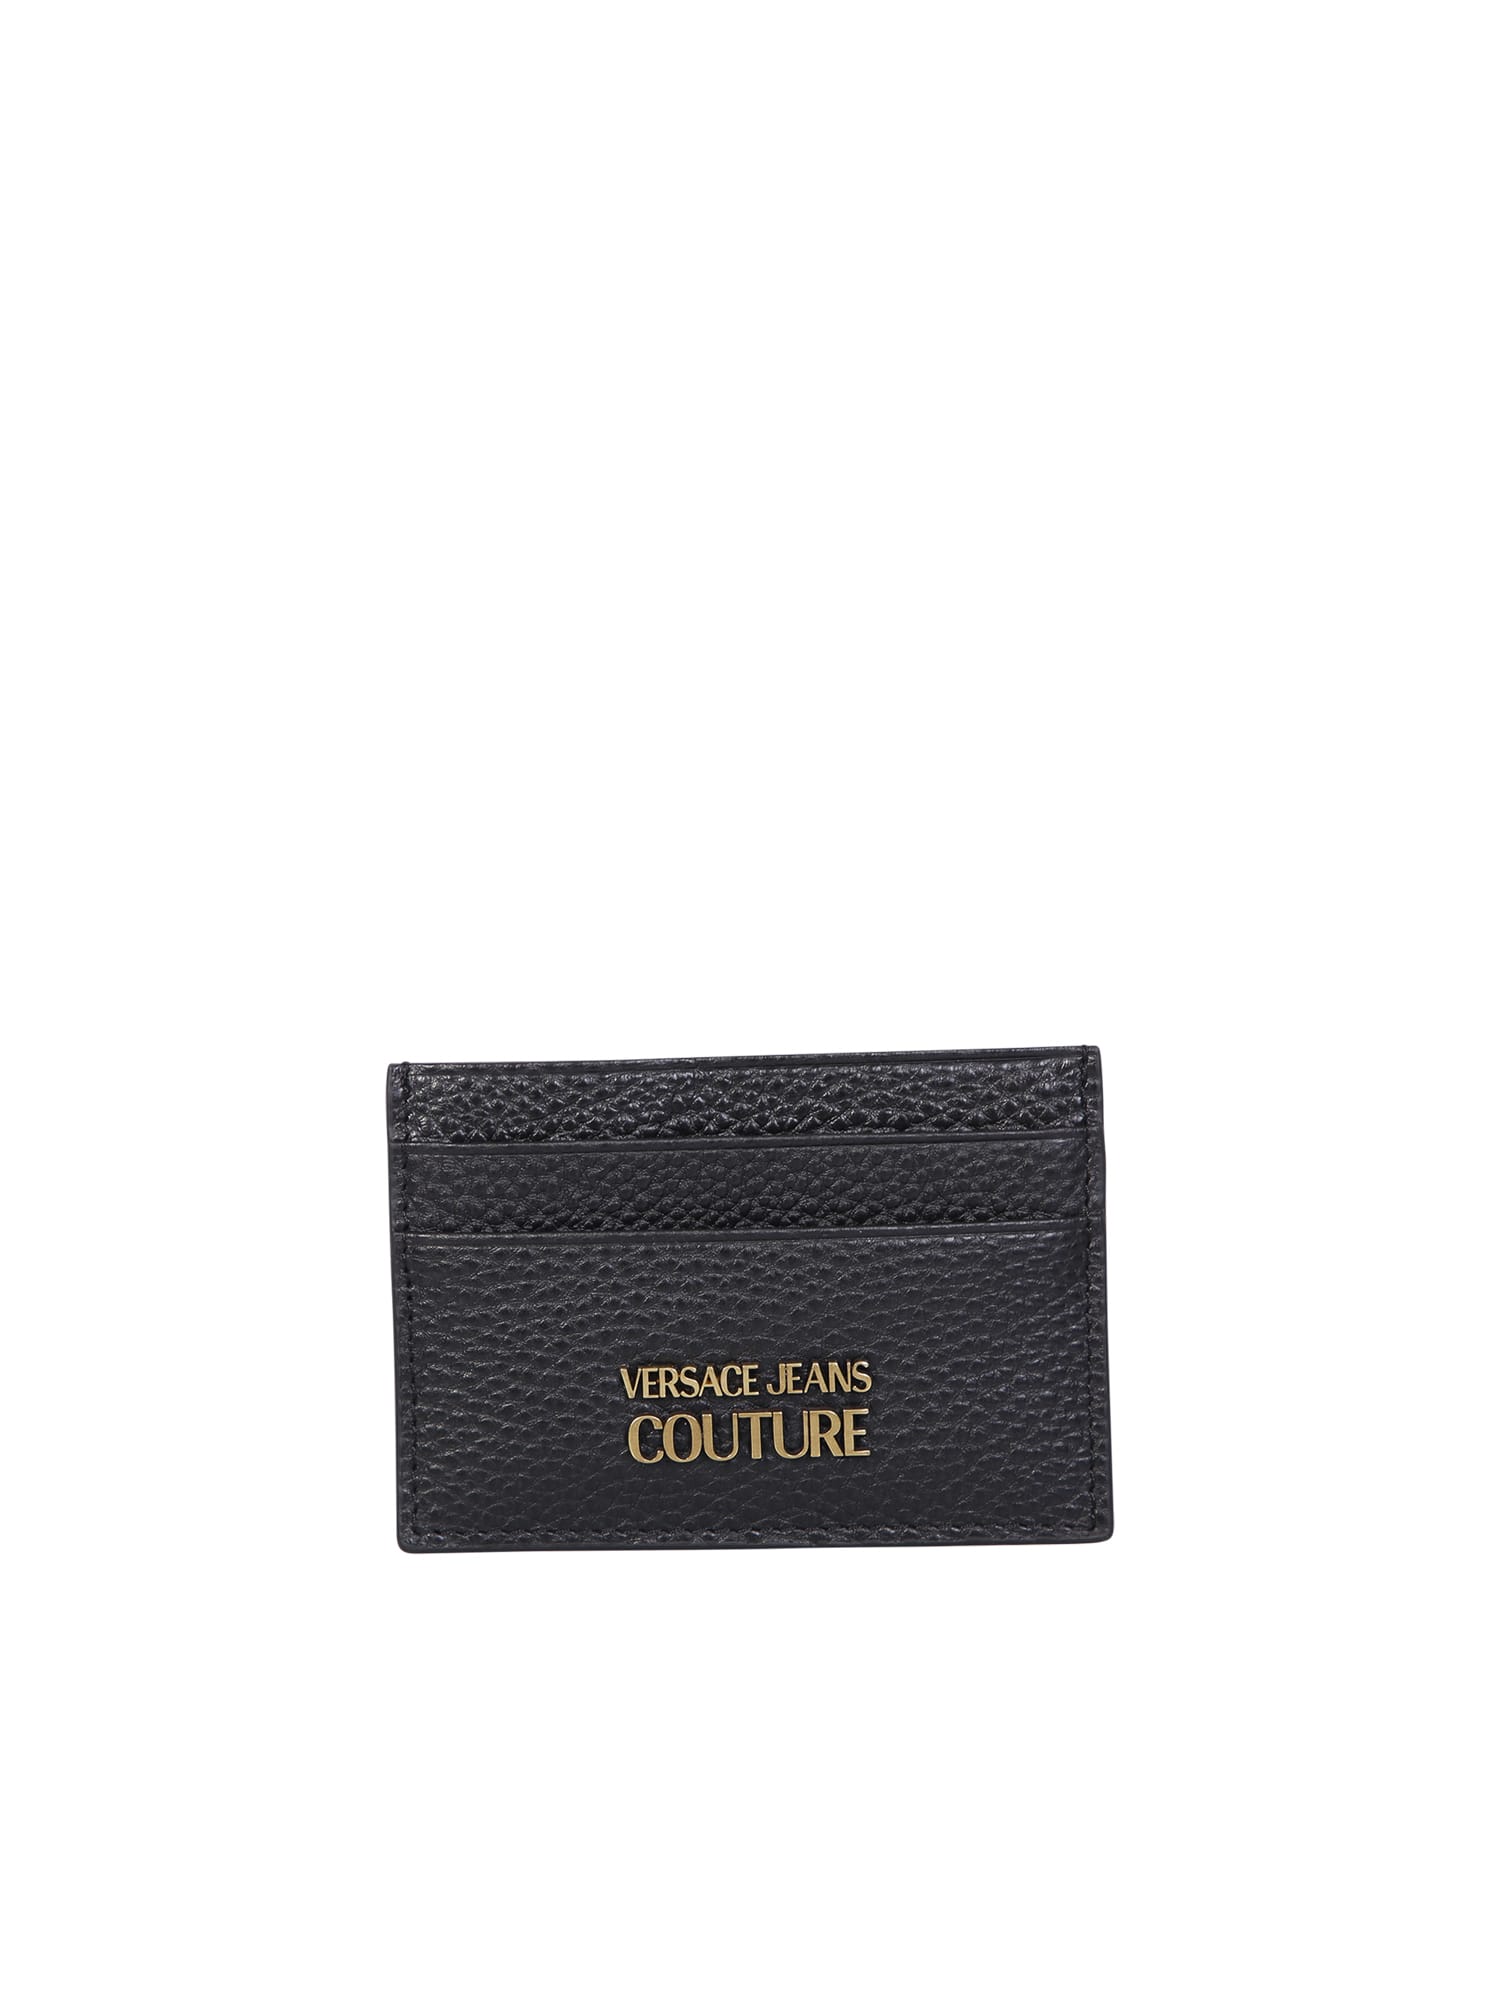 Versace Jeans Couture Leather Card Holder With Logo Black